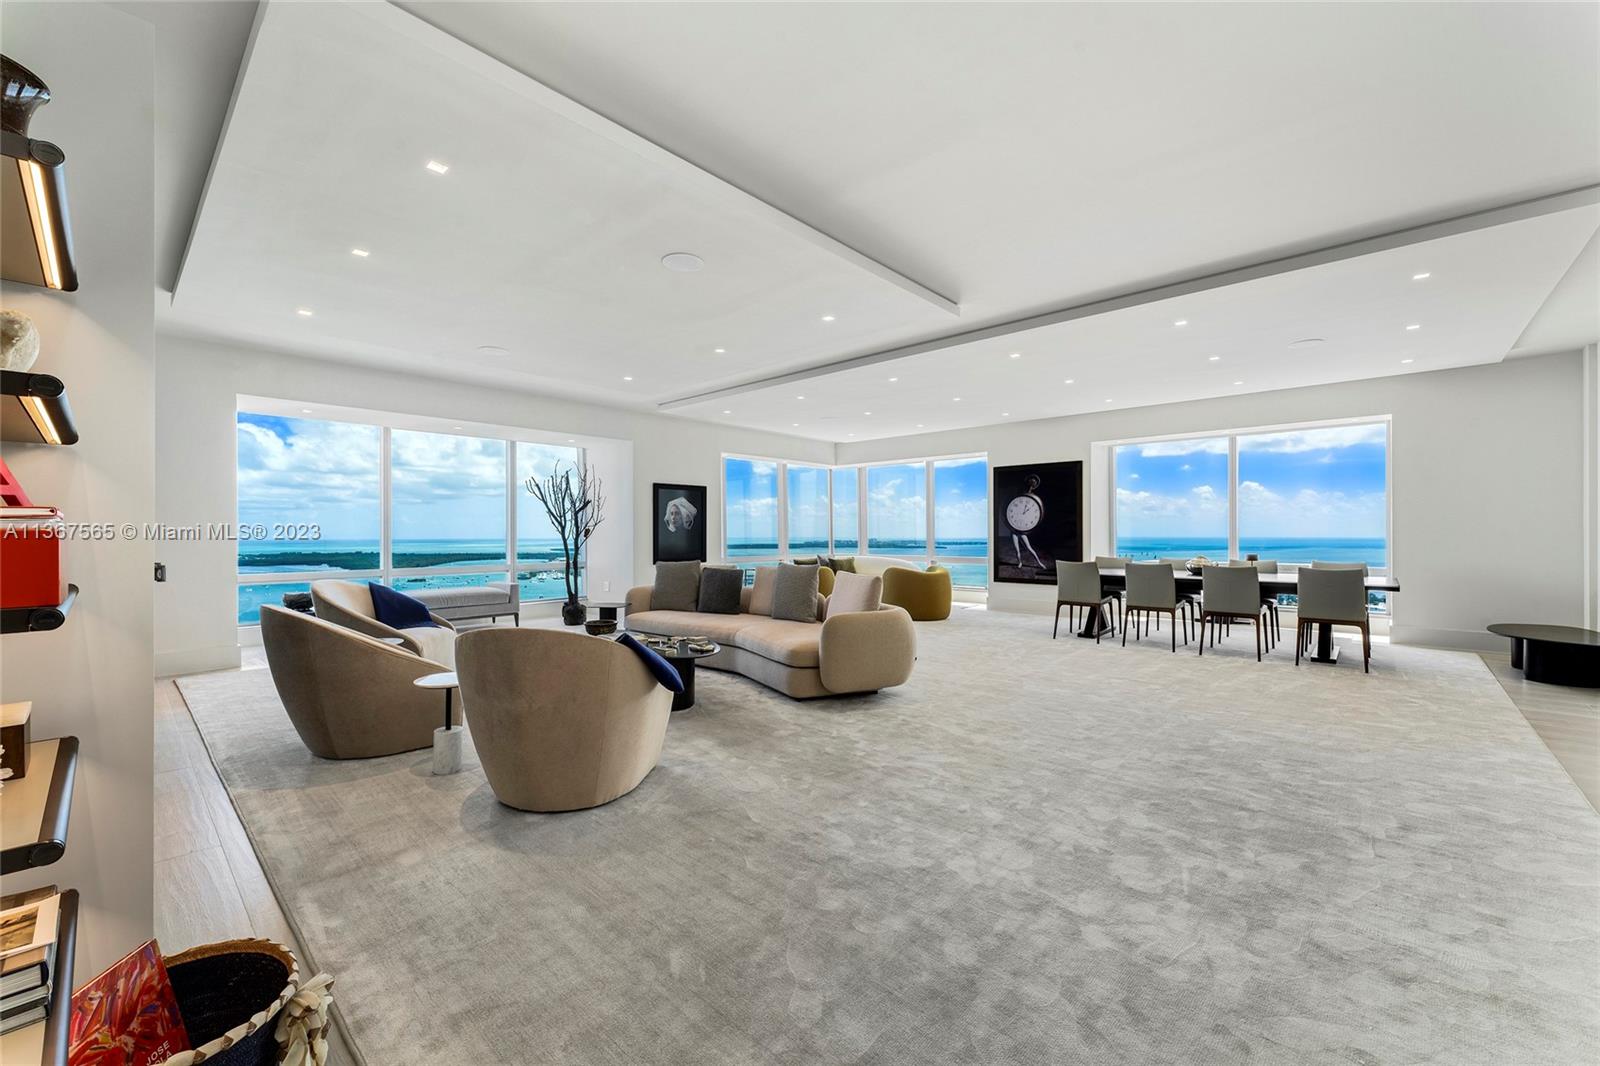 This spectacular newly renovated contemporary corner unit at the exclusive Four Seasons Miami offers 3BR/4+1BA & 3,913 SF of beautifully proportioned interiors w/amazing unobstructed views far as the eye can see over Biscayne Bay, Miami Beach, Atlantic Ocean, Key Biscayne and city. Custom wall papers, millwork, cabinetry, porcelain oak tile floors, designer treatments. Spacious living & dining floor plan surrounded by glass walls w/water views from every angle. Chef’s kitchen w/top-of the-line appliances, Stosa cabinetry, Opustone center island & access to a terrace. Private principal suite offers custom walk-in closet, private terrace & stunning bathroom w/exquisite marble & sunken tub. The other two BRs are each meticulously designed w/en-suite baths. 5-star Four Seasons amenities.